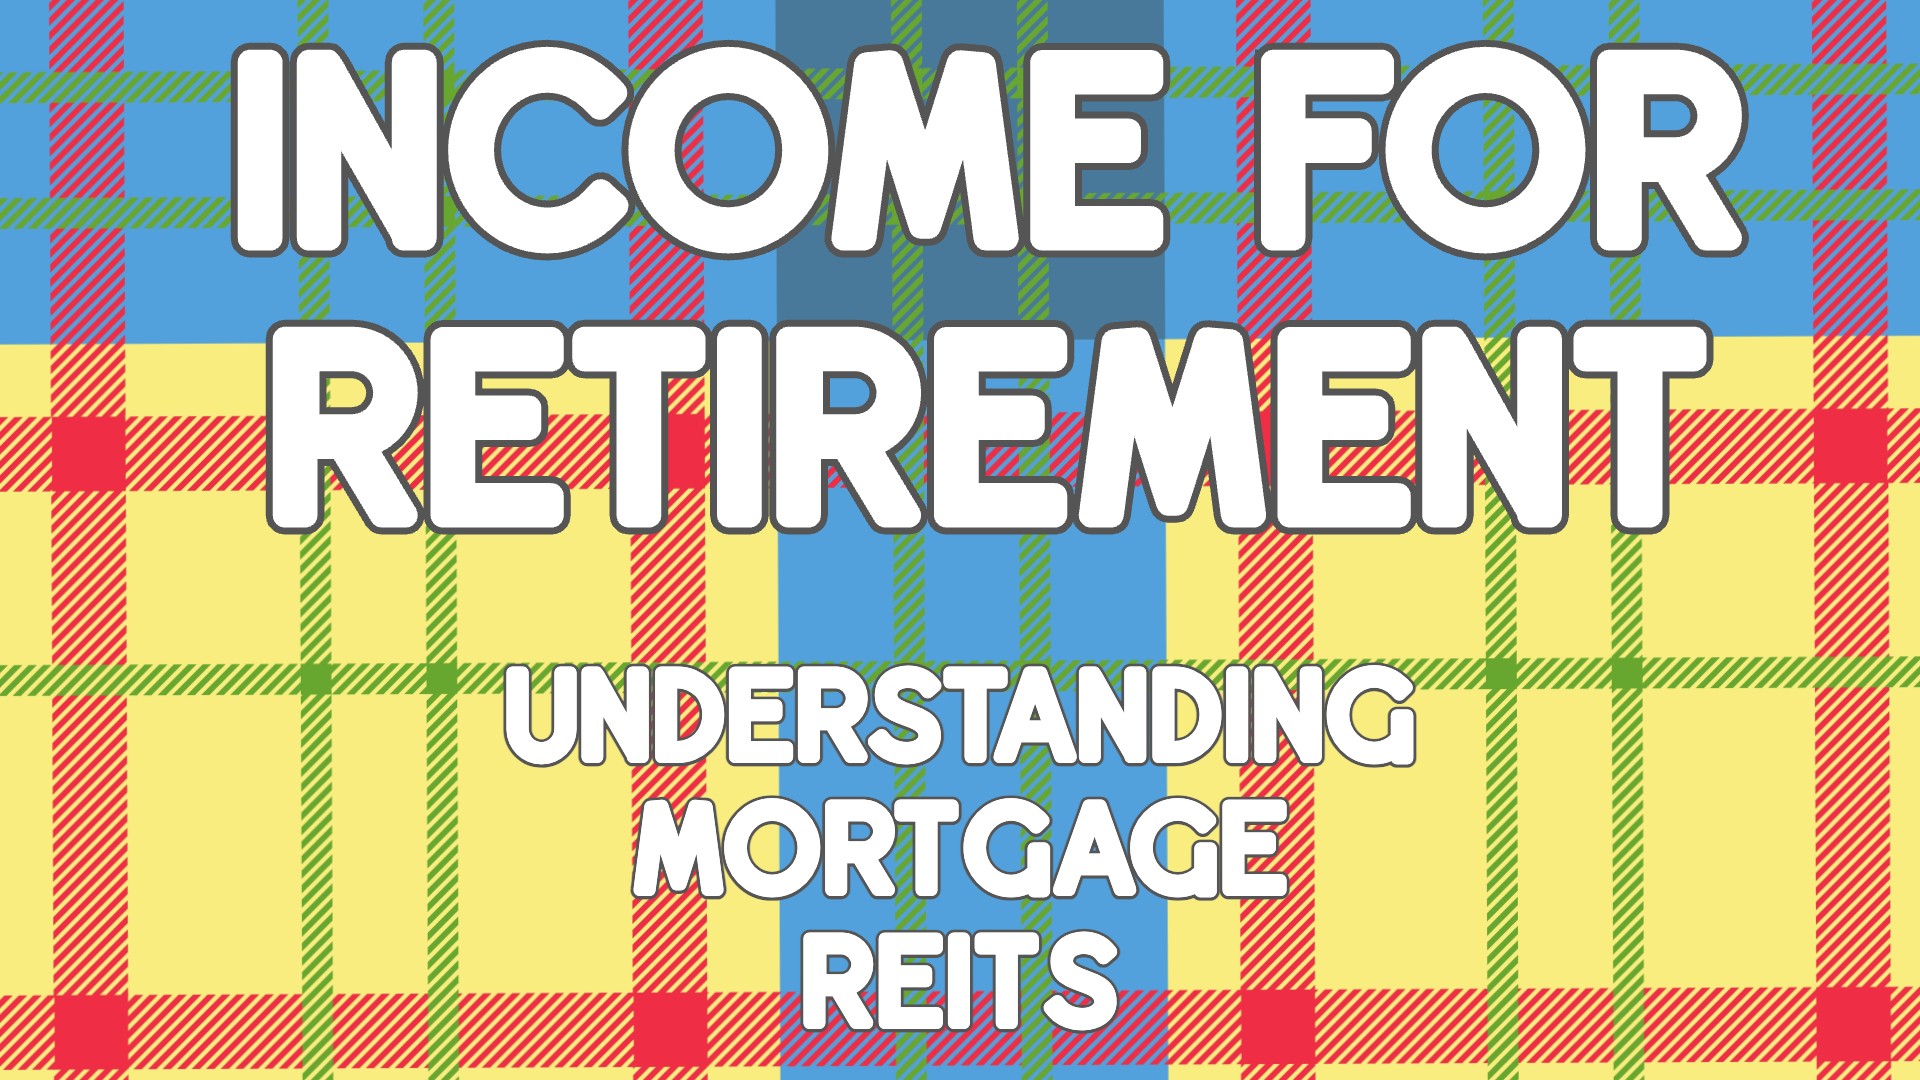 Income for Retirement 3 MREITS